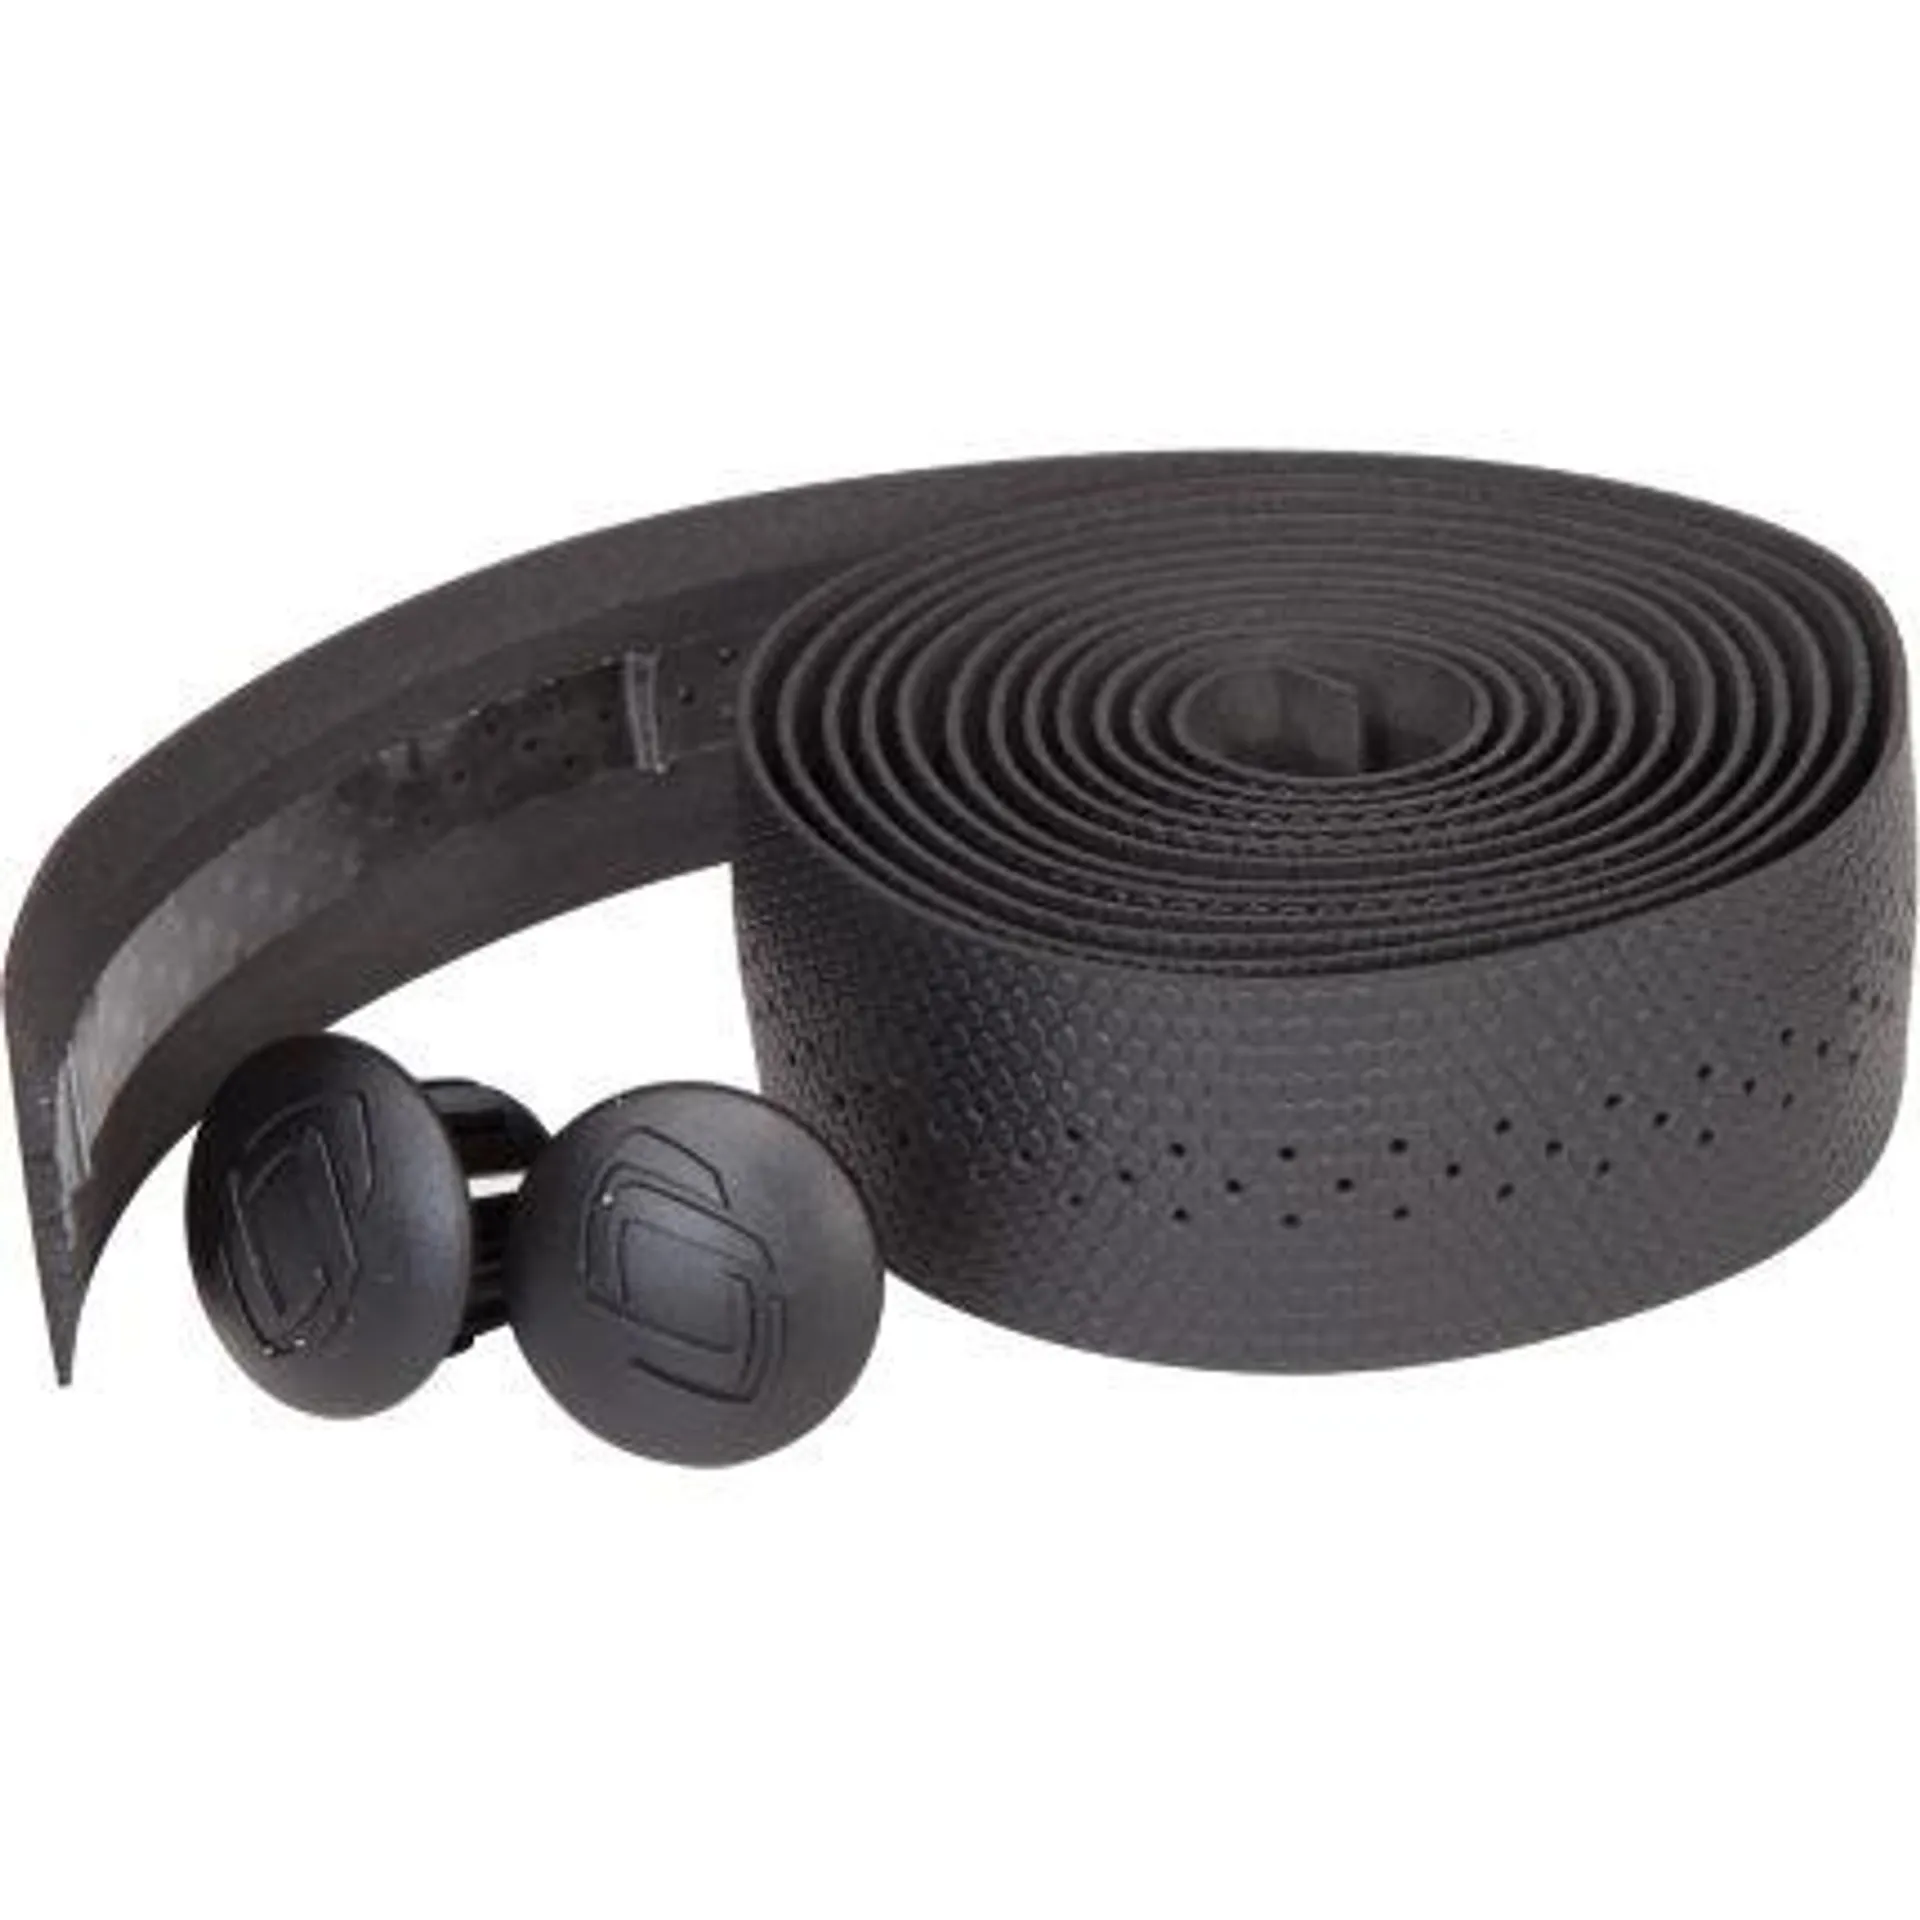 LifeLine Professional Bar Tape With Perforation